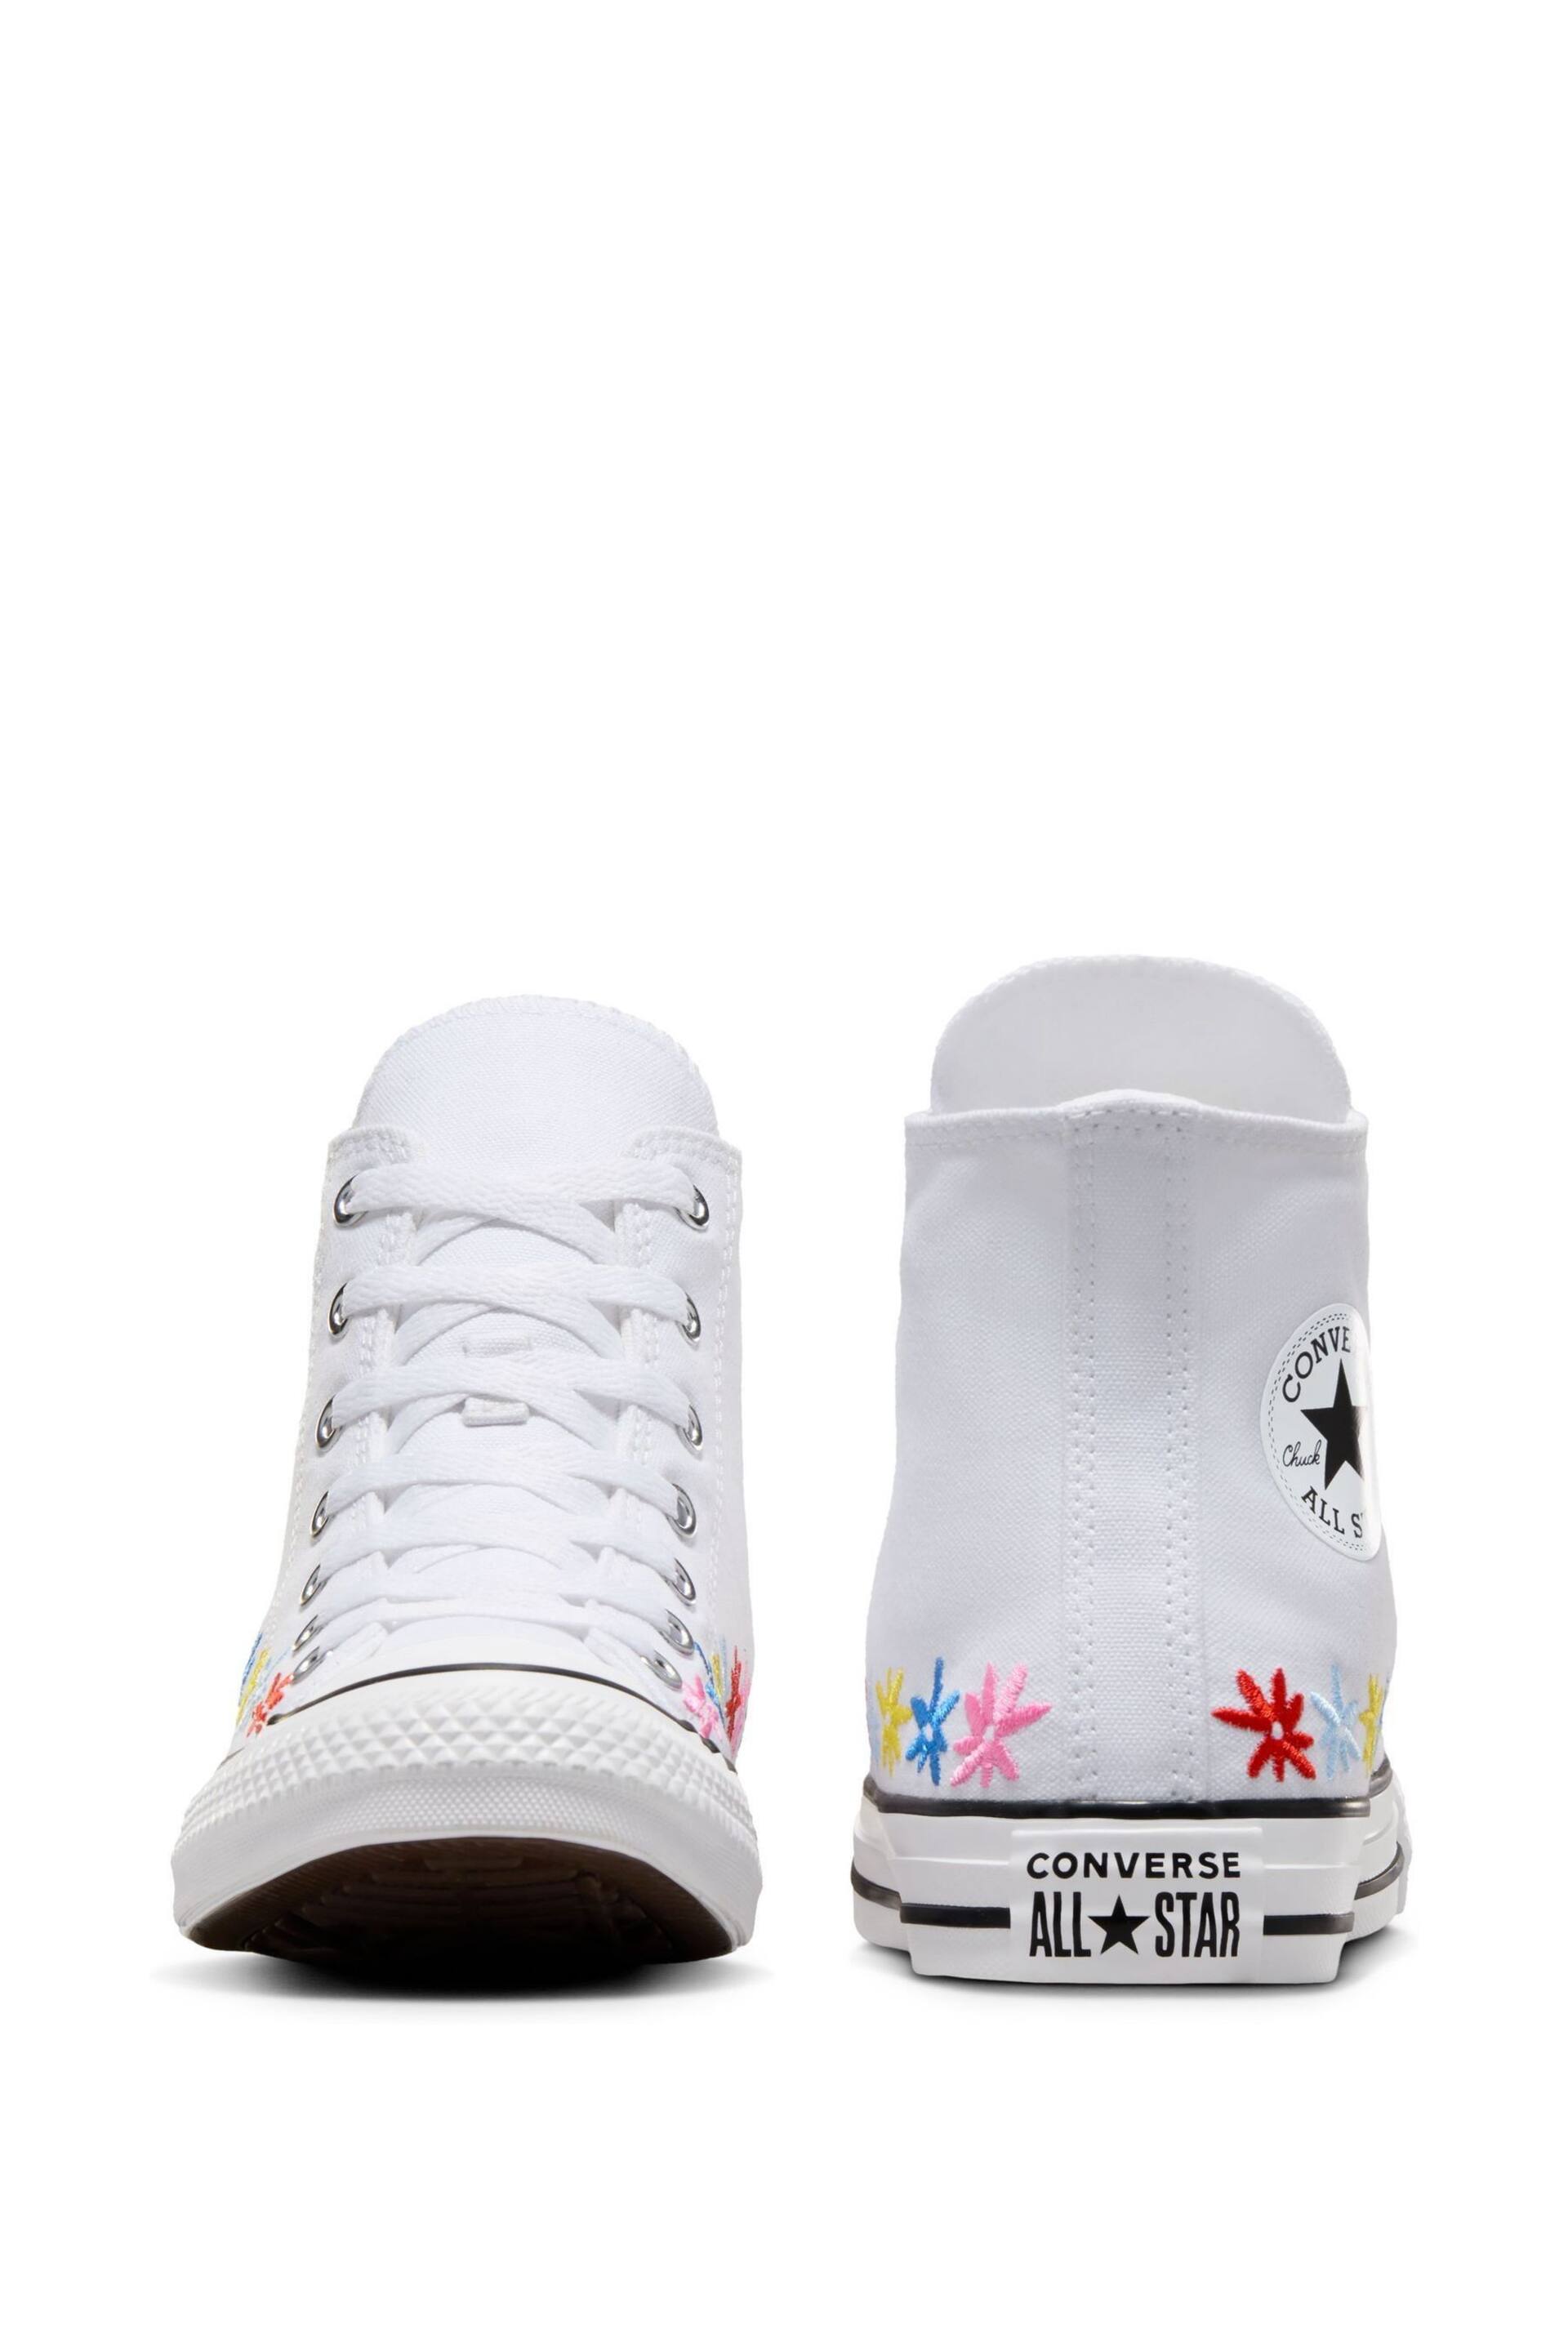 Converse White Embroidered Chuck Taylor All Star Youth Trainers - Image 2 of 9